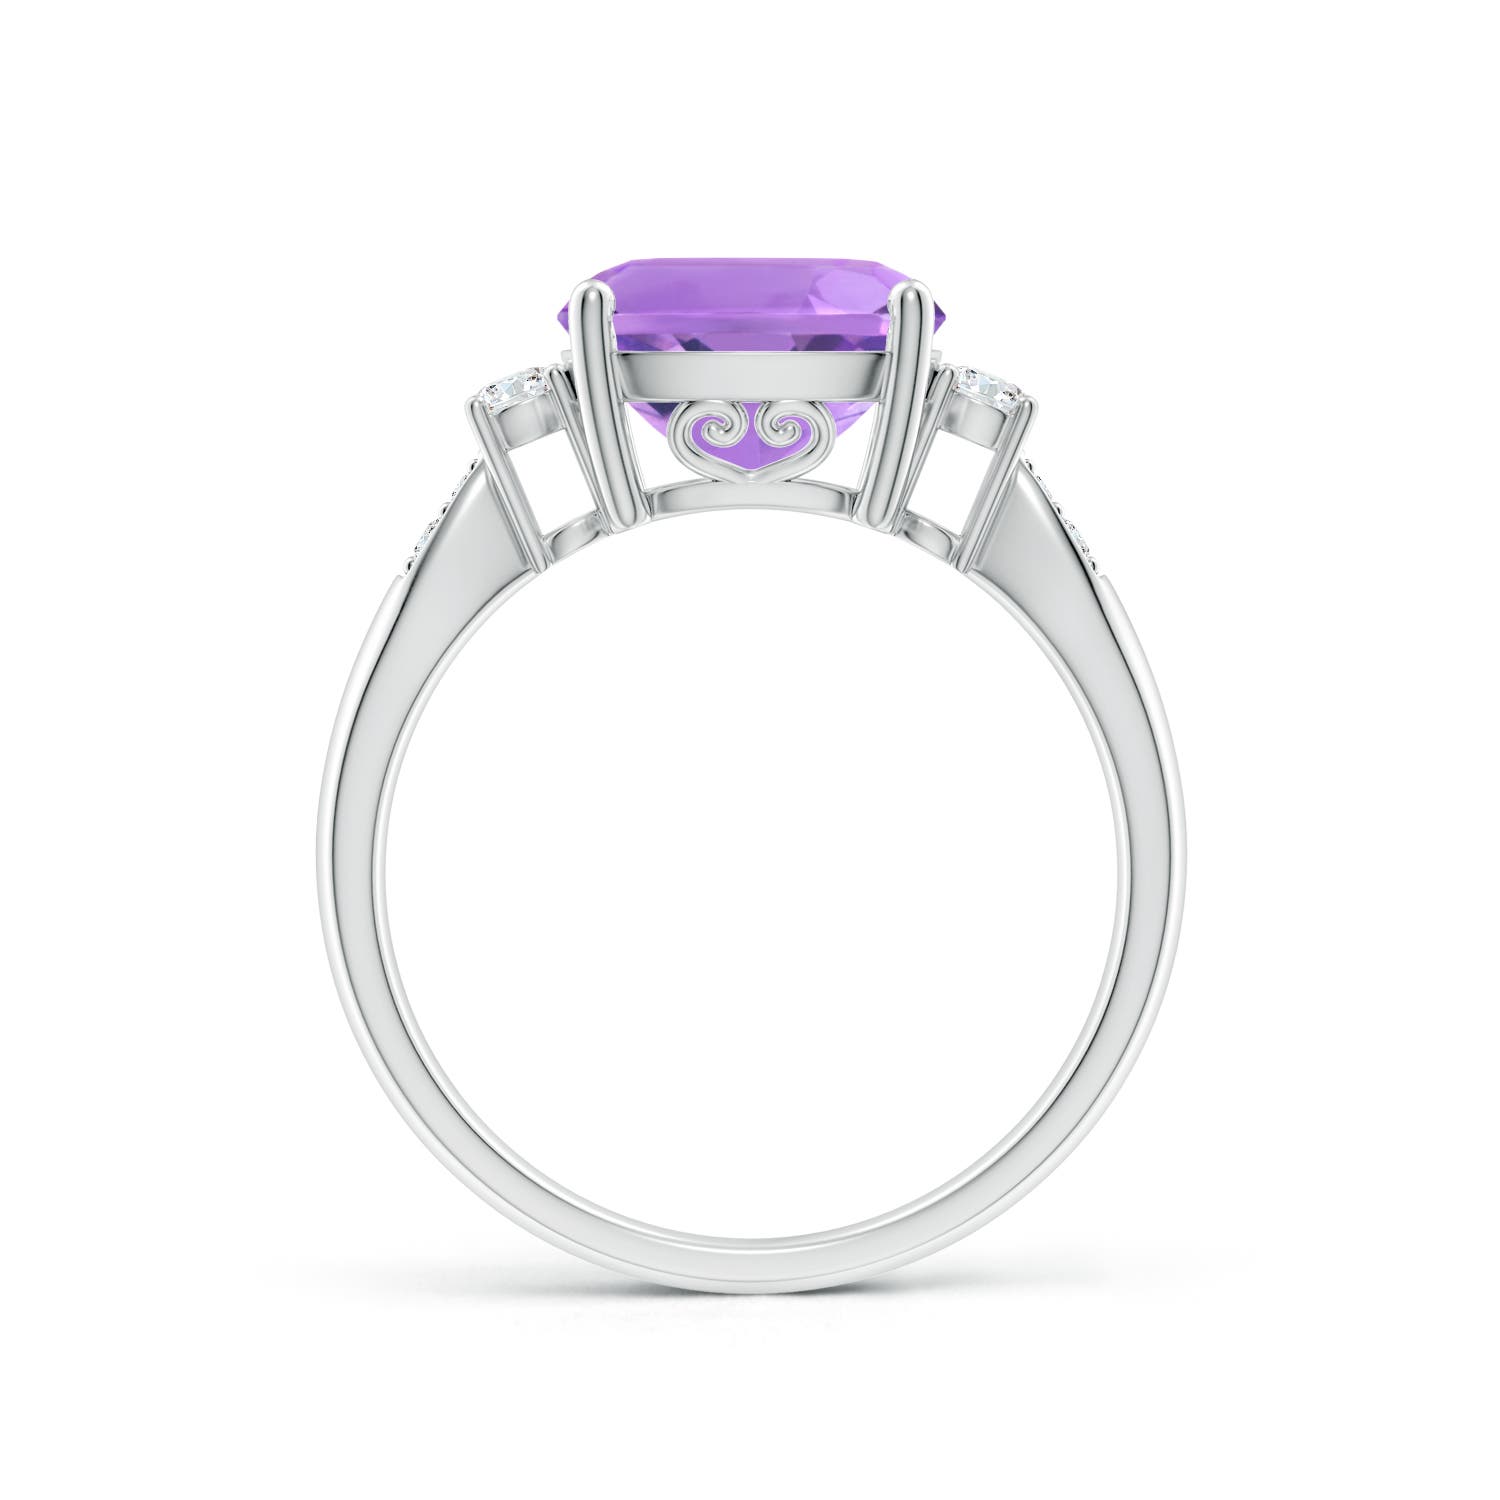 A - Amethyst / 3.27 CT / 14 KT White Gold